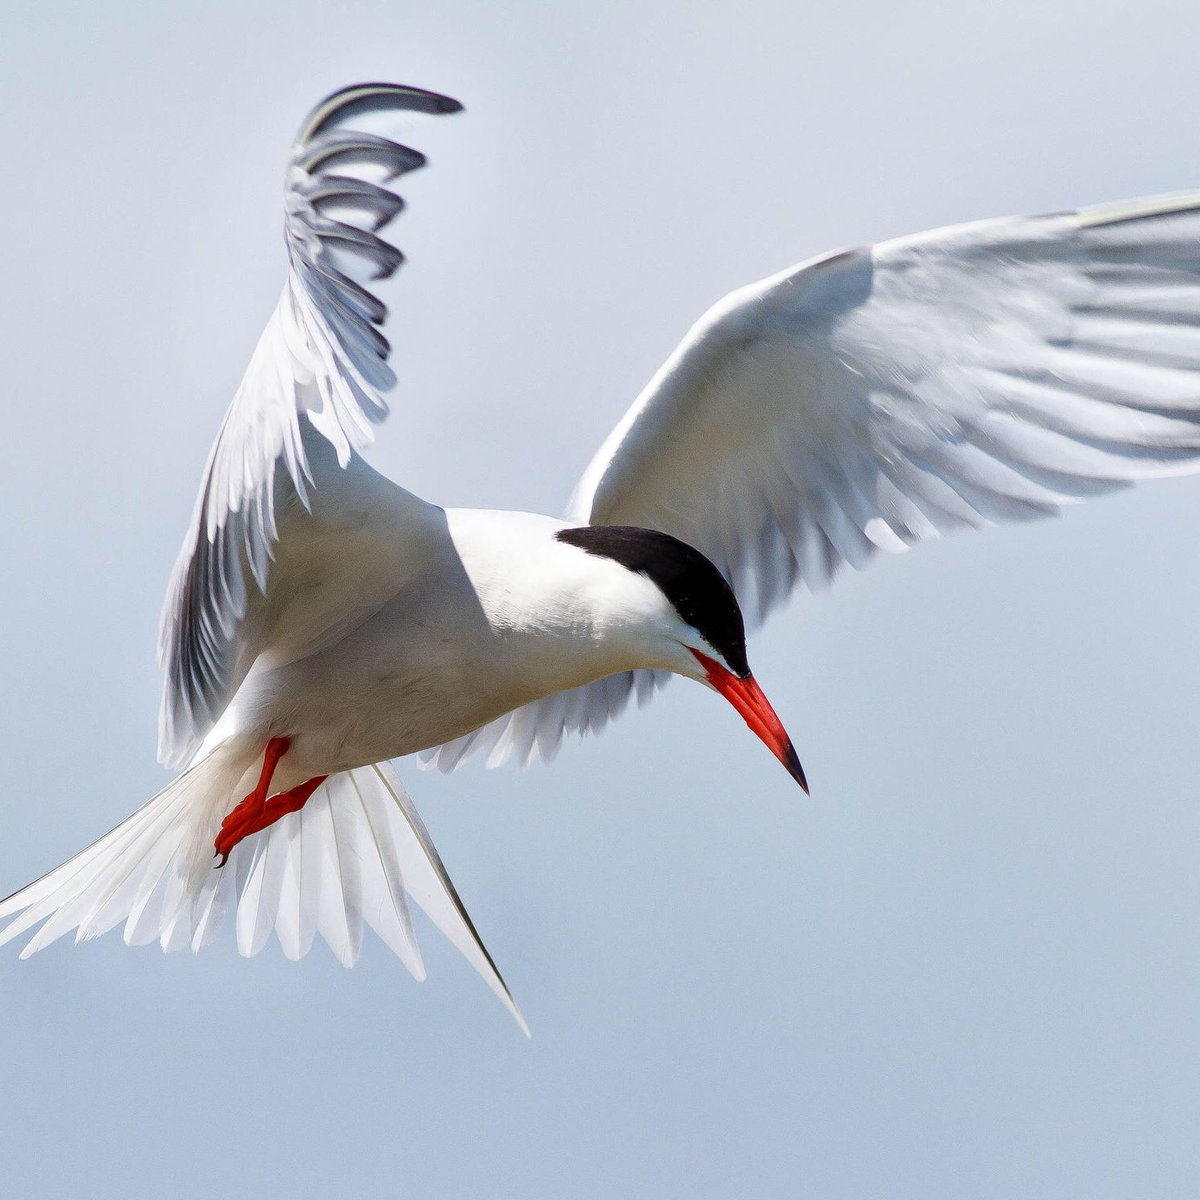 yuta ♦︎ tern- this bird moves like it has a bdsm chokehold on the laws of physics- please look at this bird instead of asking me to talk about yuta 